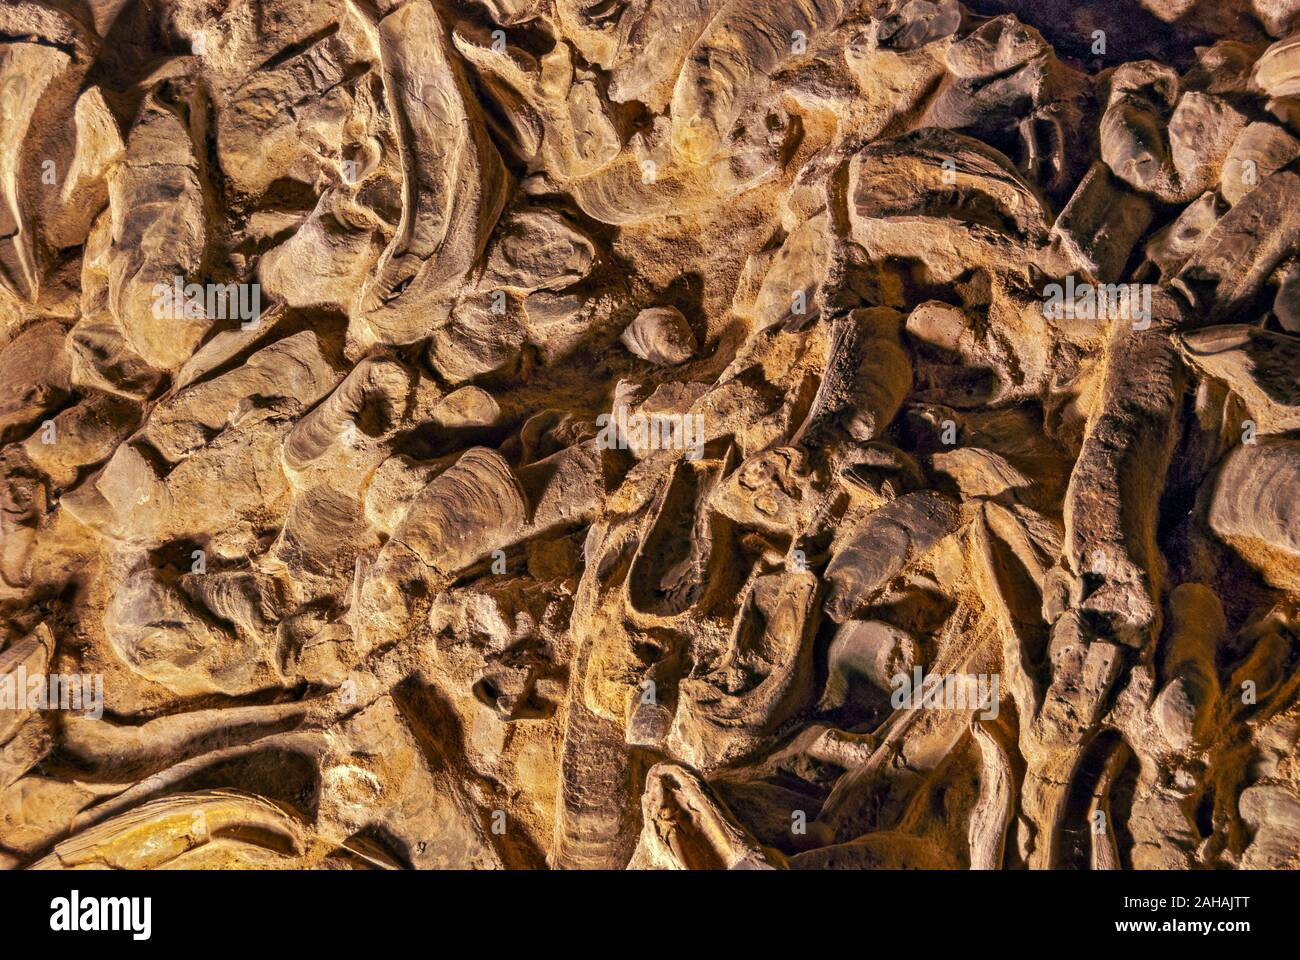 details of a reef with fossilized giant oysters Stock Photo